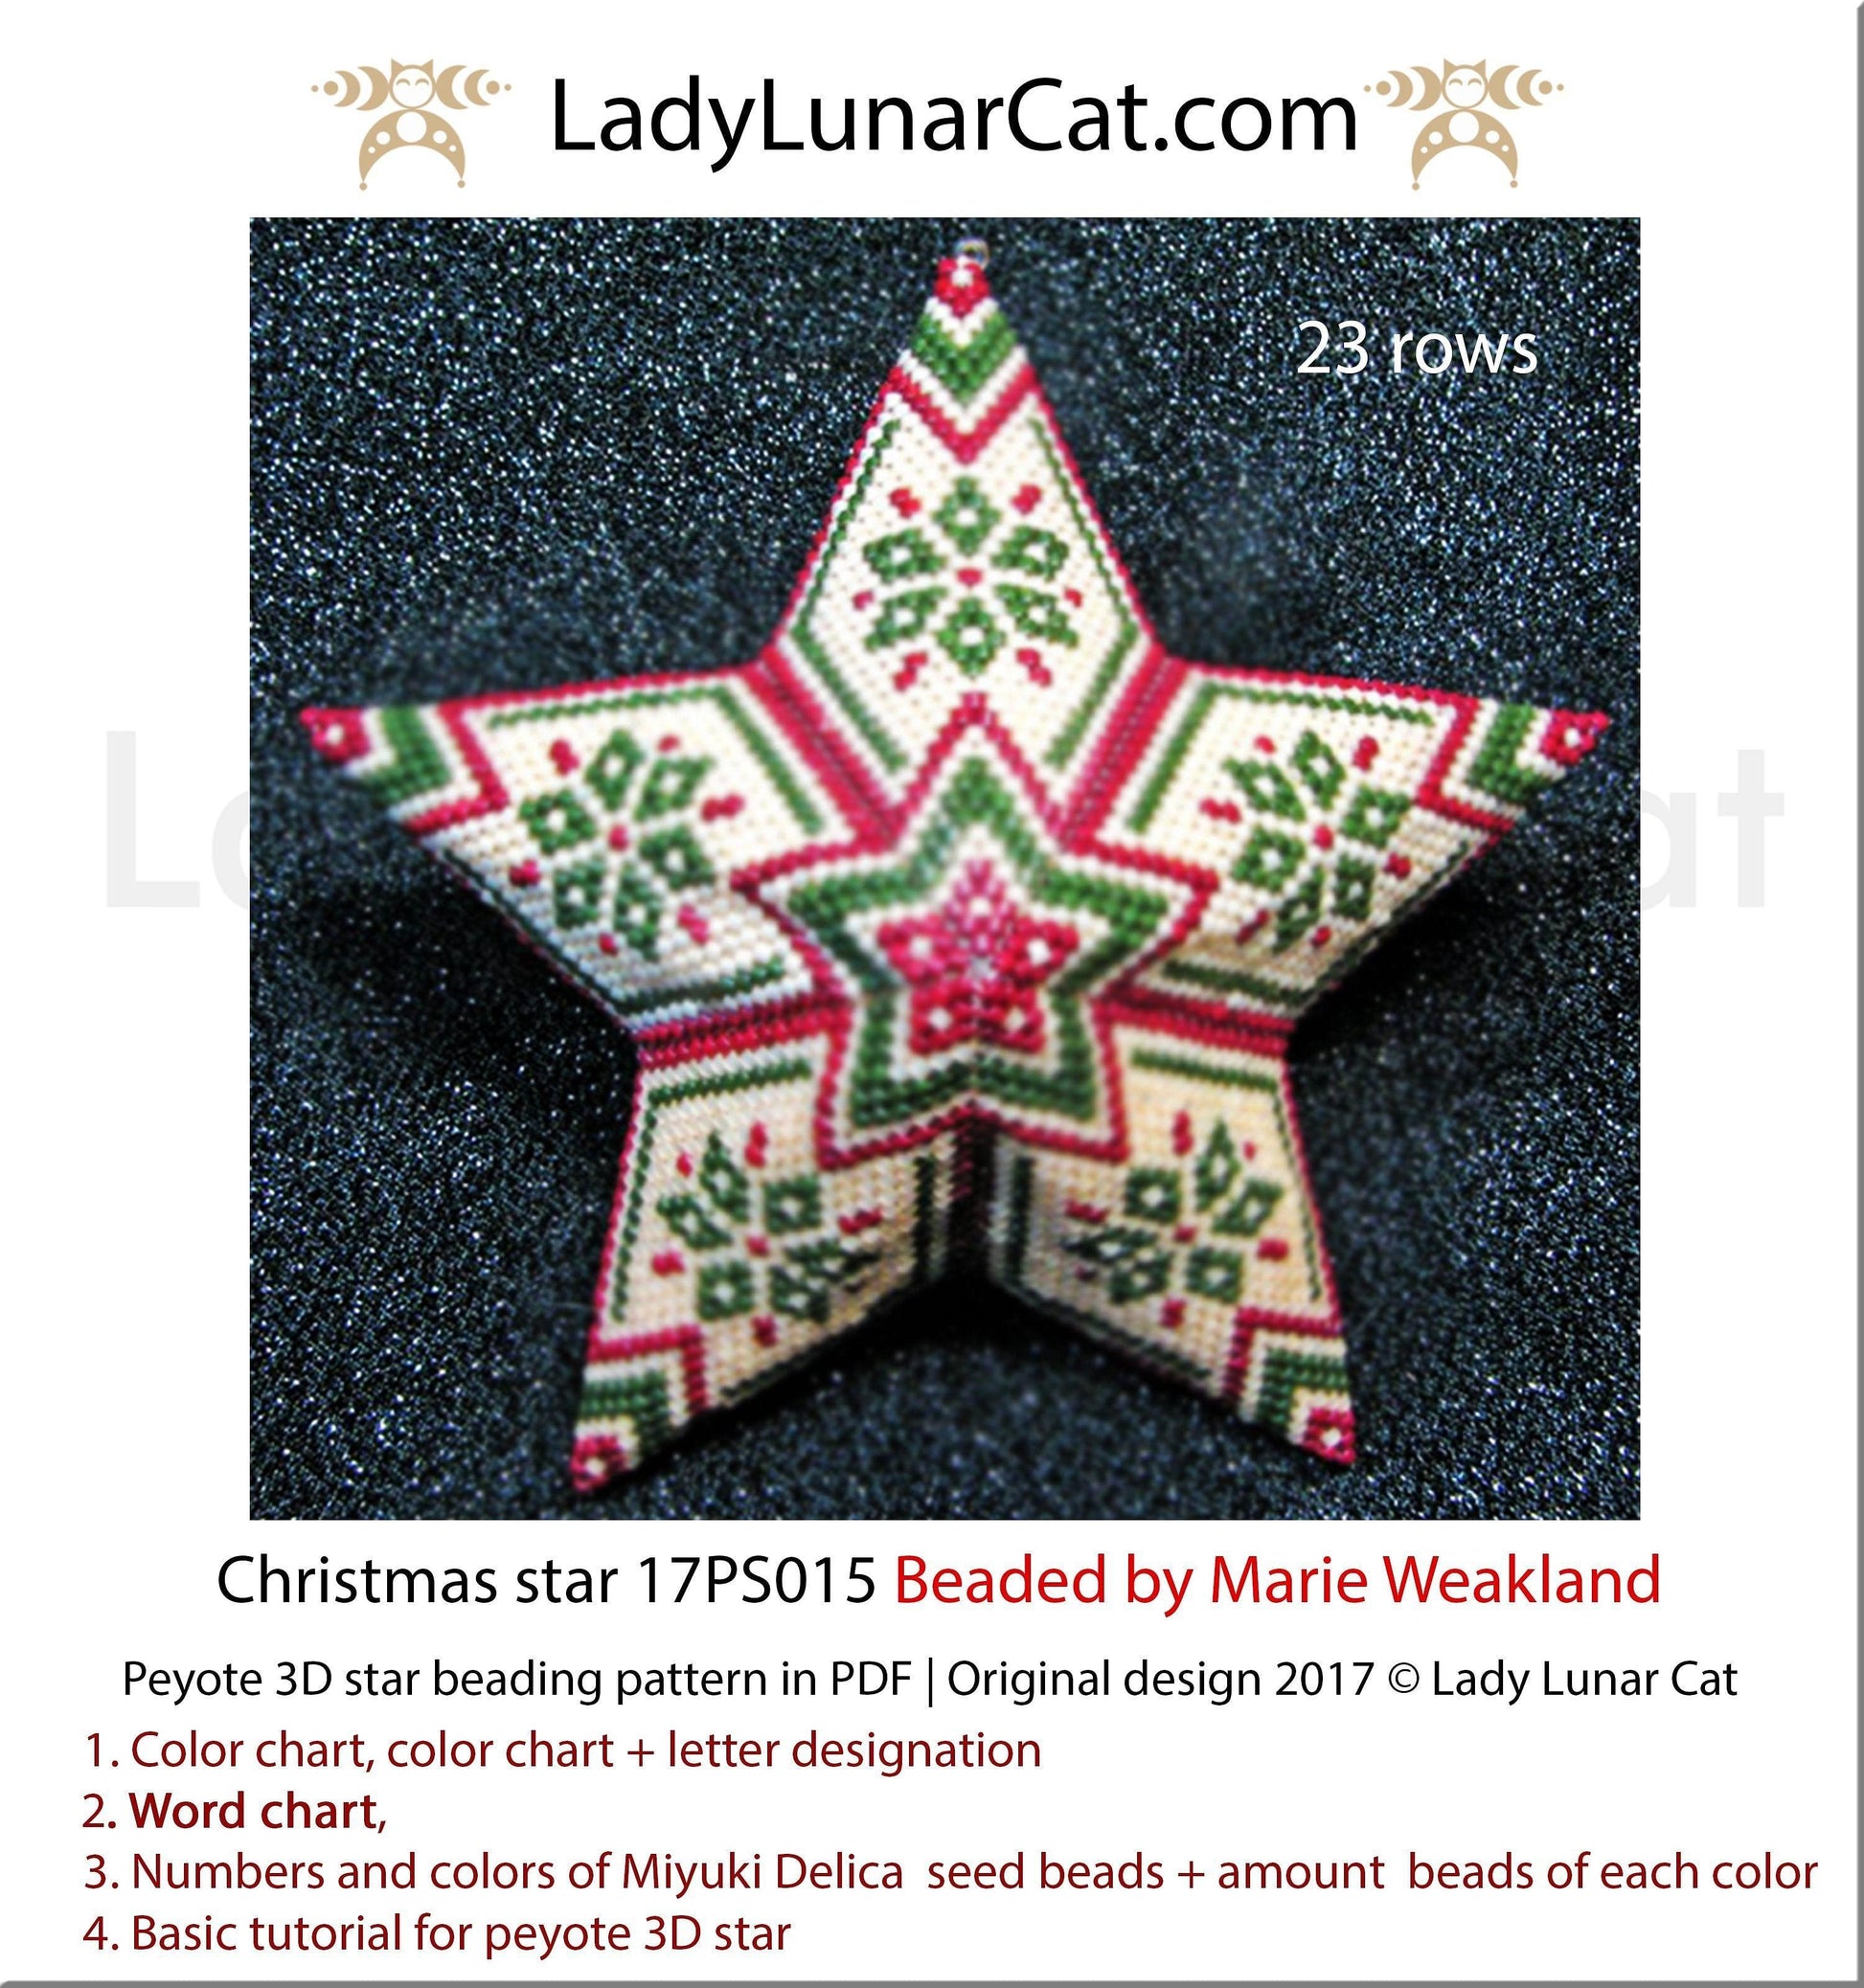 Copy of Beaded star pattern for beadweaving Christmas 21PS001 LadyLunarCat